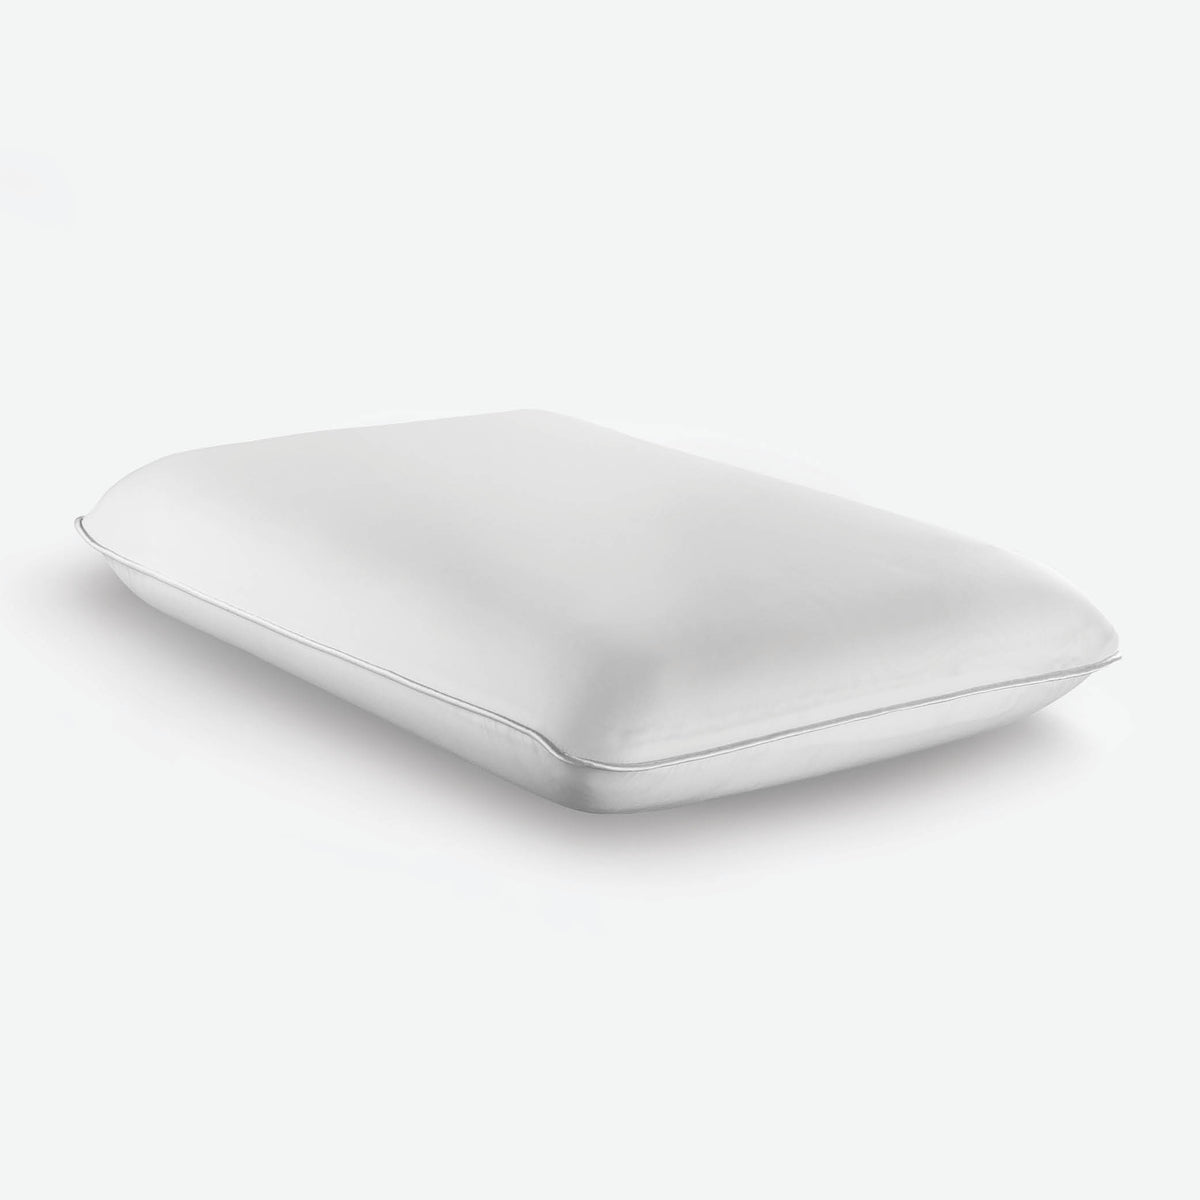 Save 15% on a set of luxury cooling gel pillows for a good night's